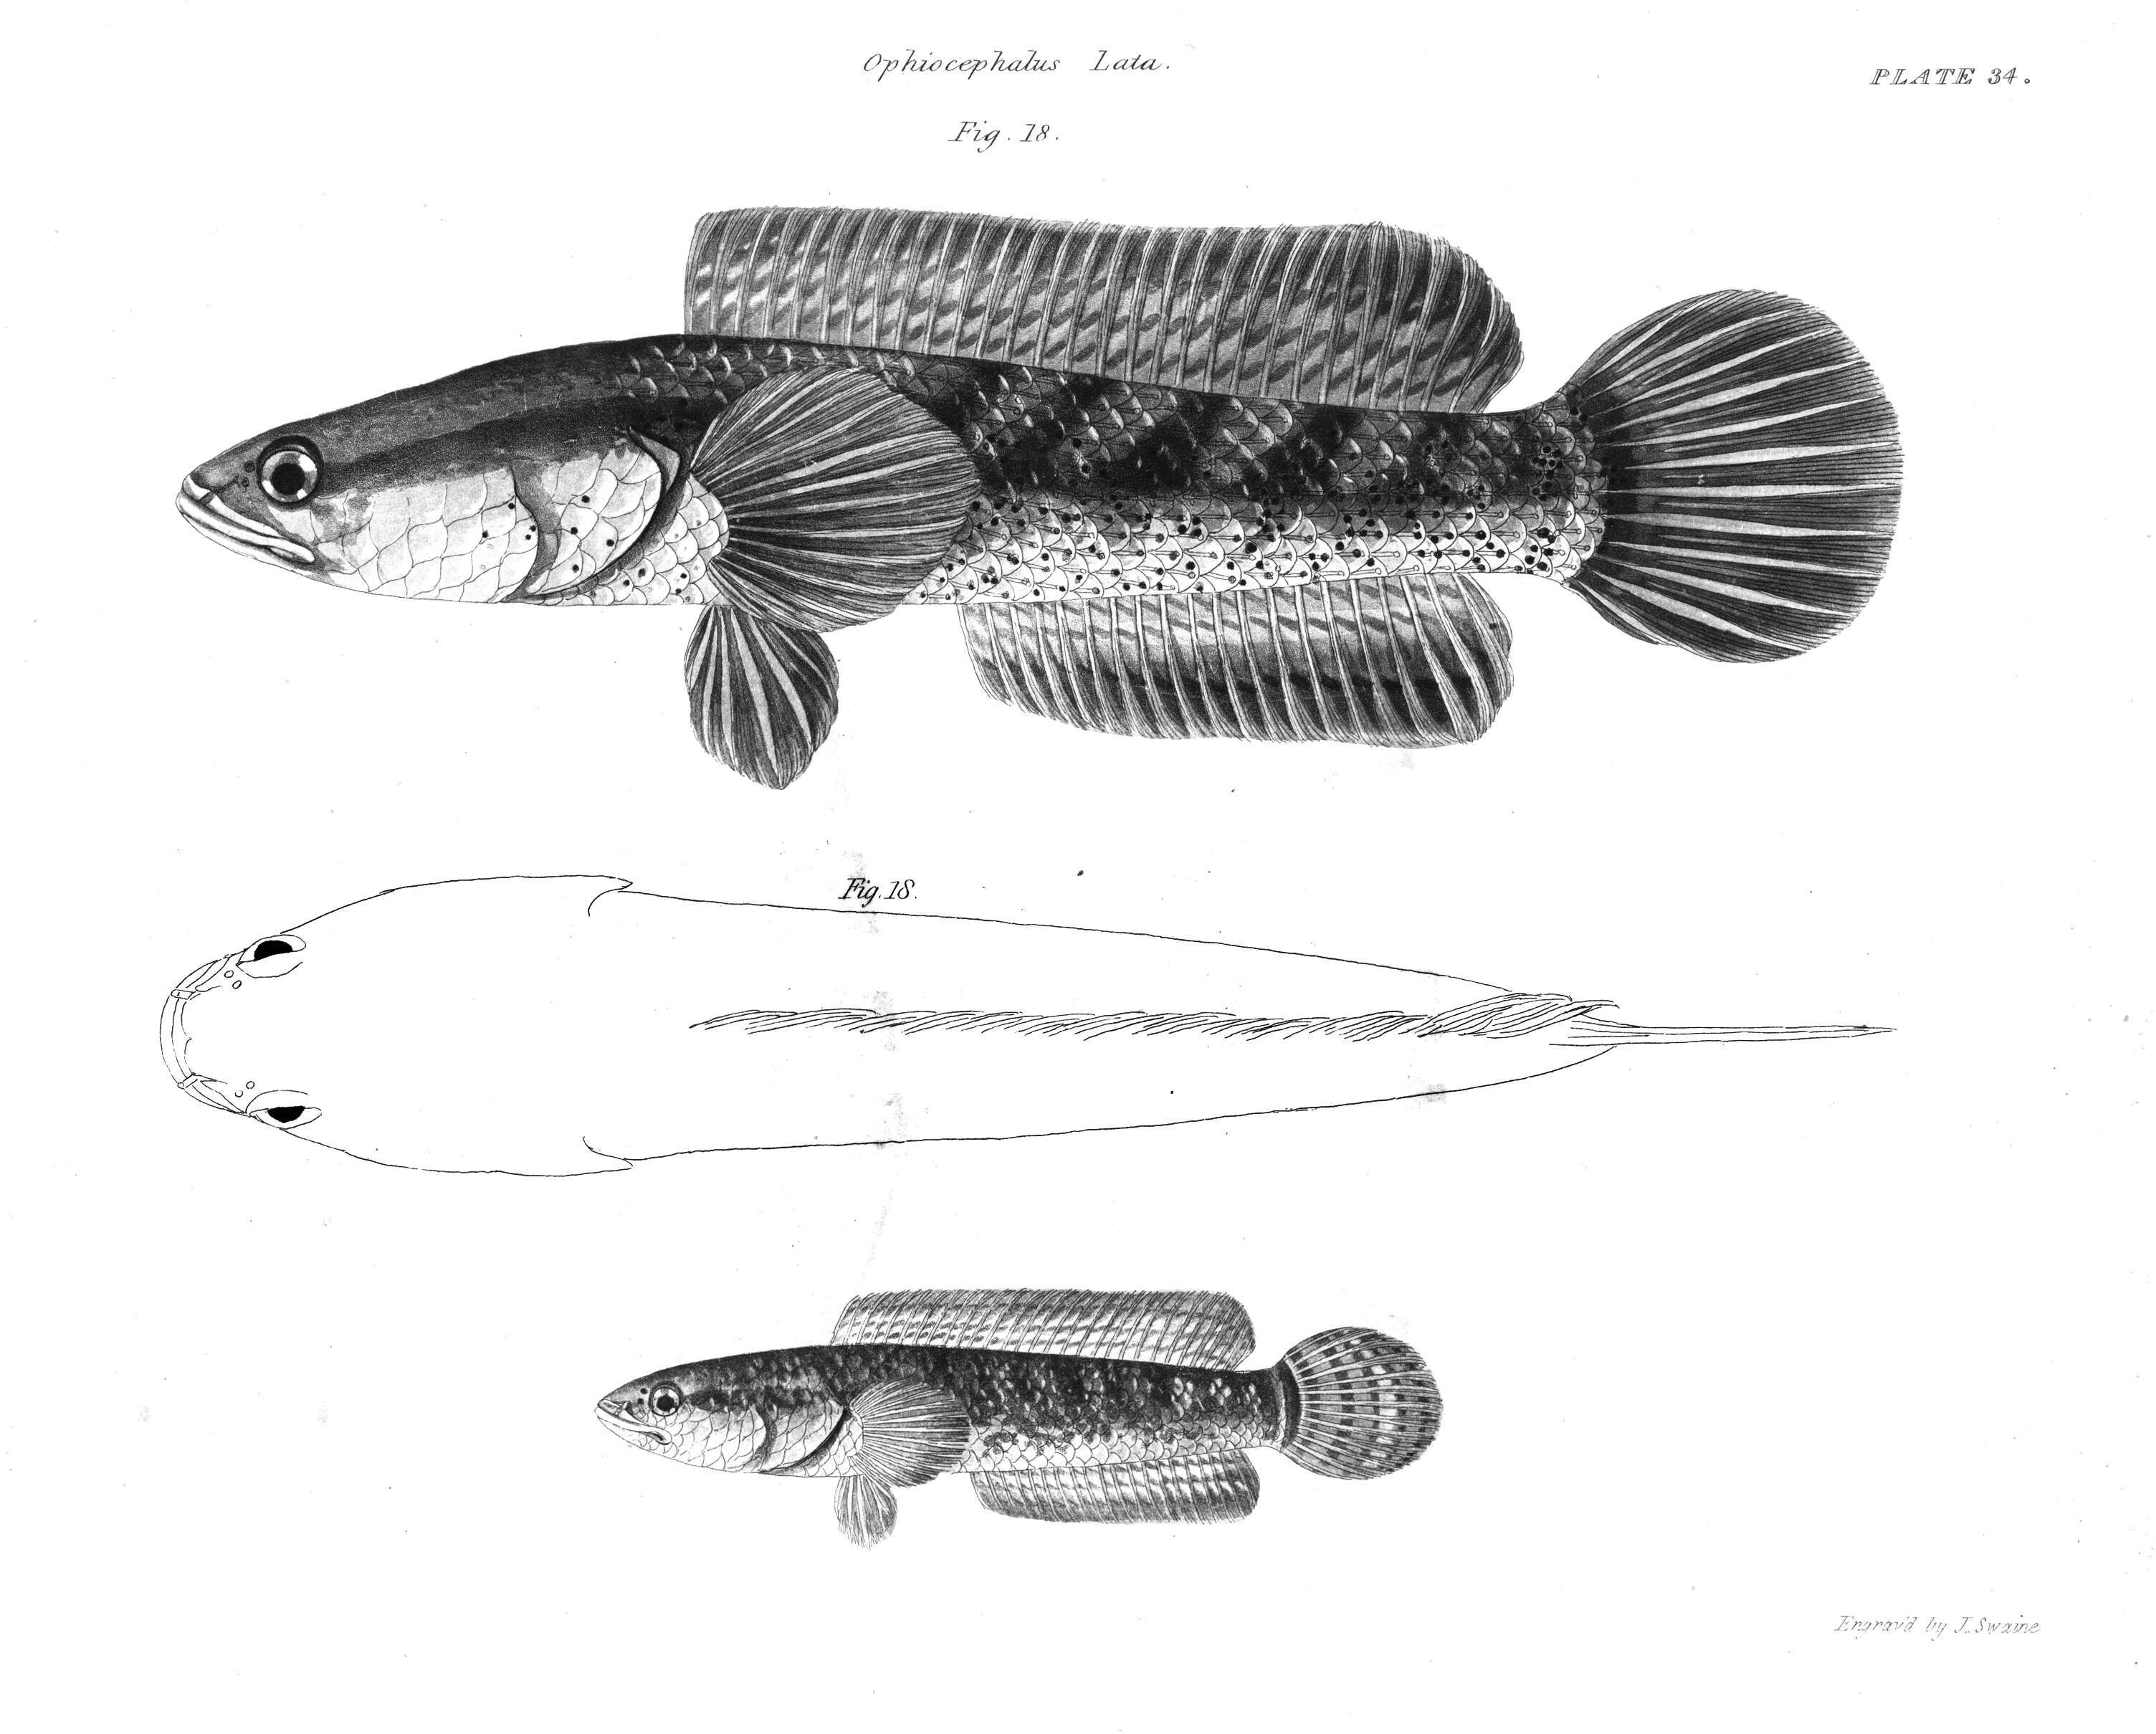 Image of Spotted snakehead